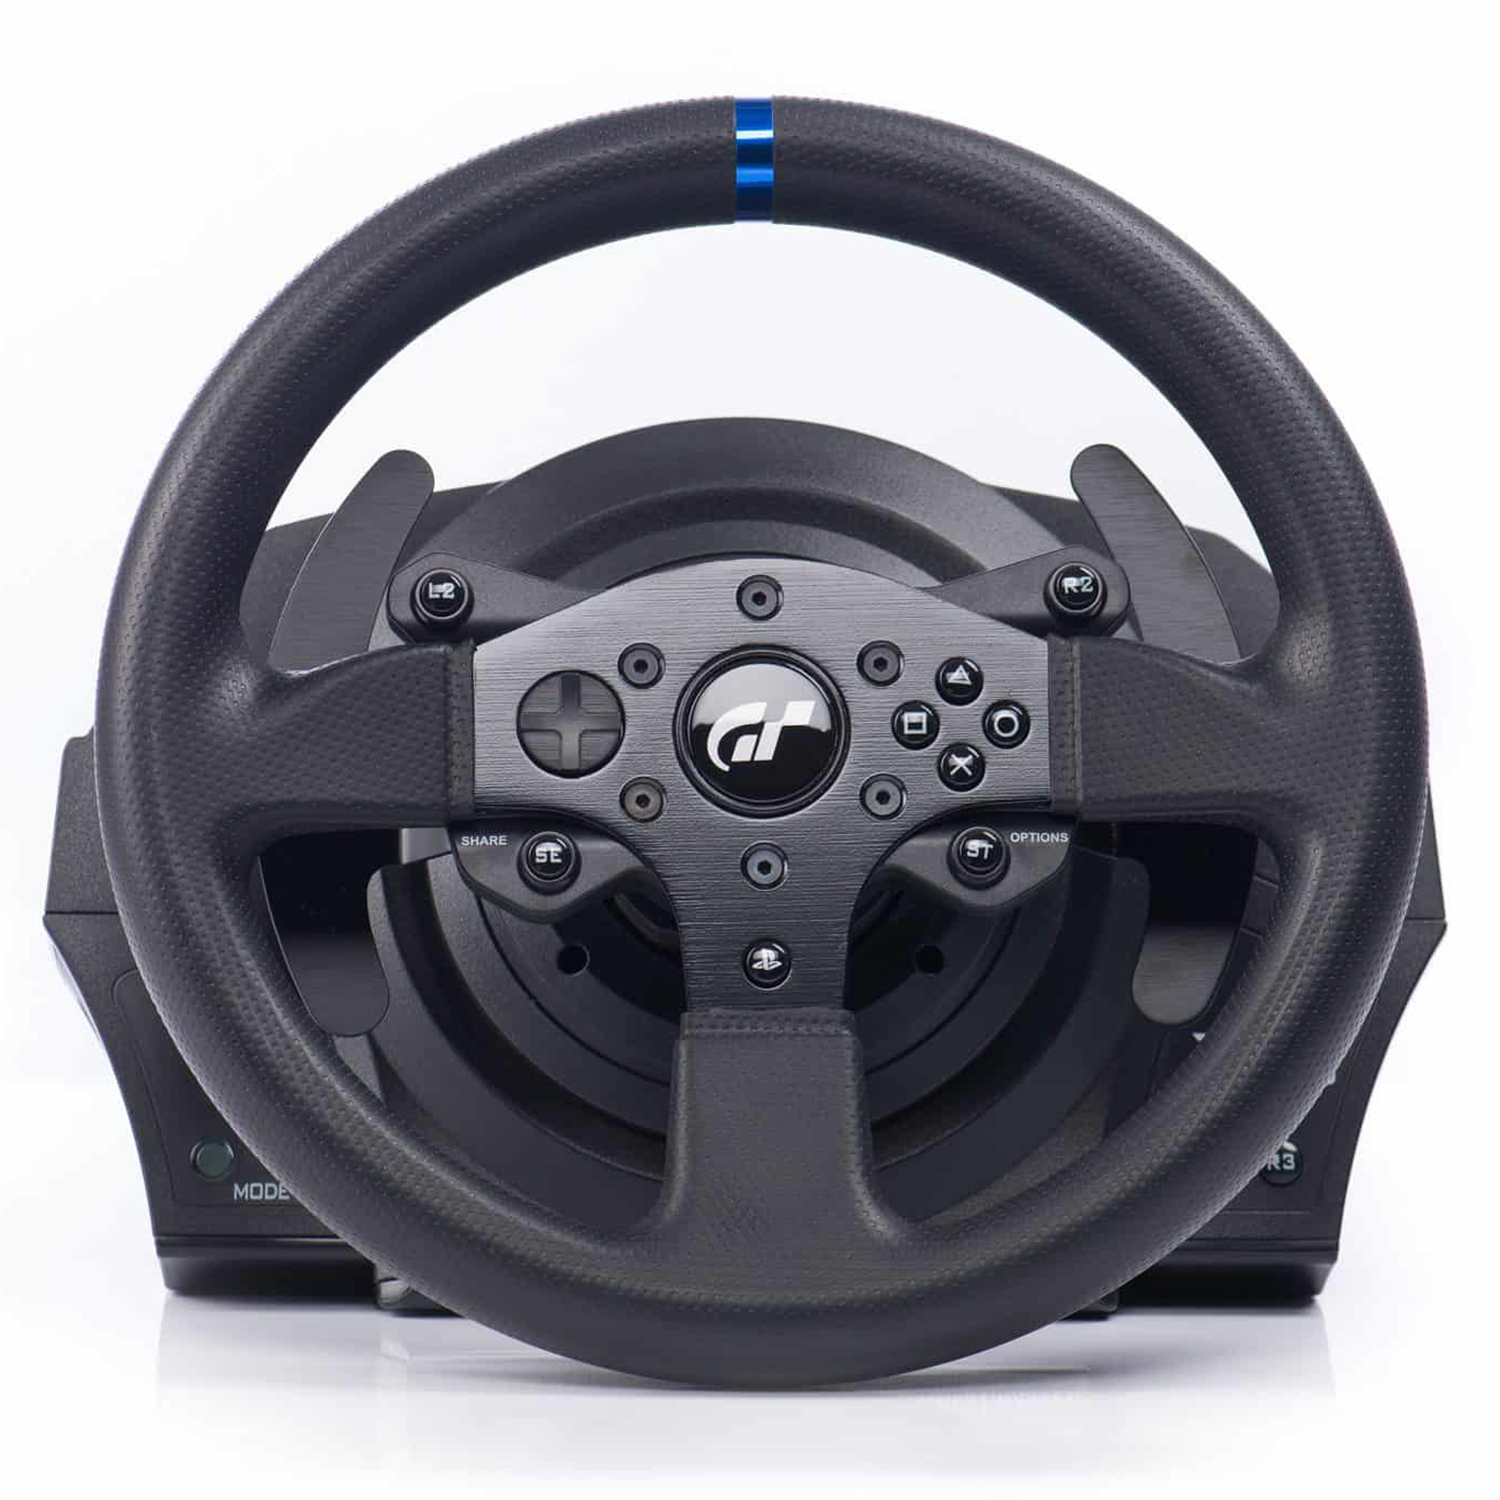 Tws t300. Руль Thrustmaster t300rs. Thrustmaster t300 RS gt. Thrustmaster t300rs gt Edition. Thrustmaster t300 RS Gran Turismo Edition.